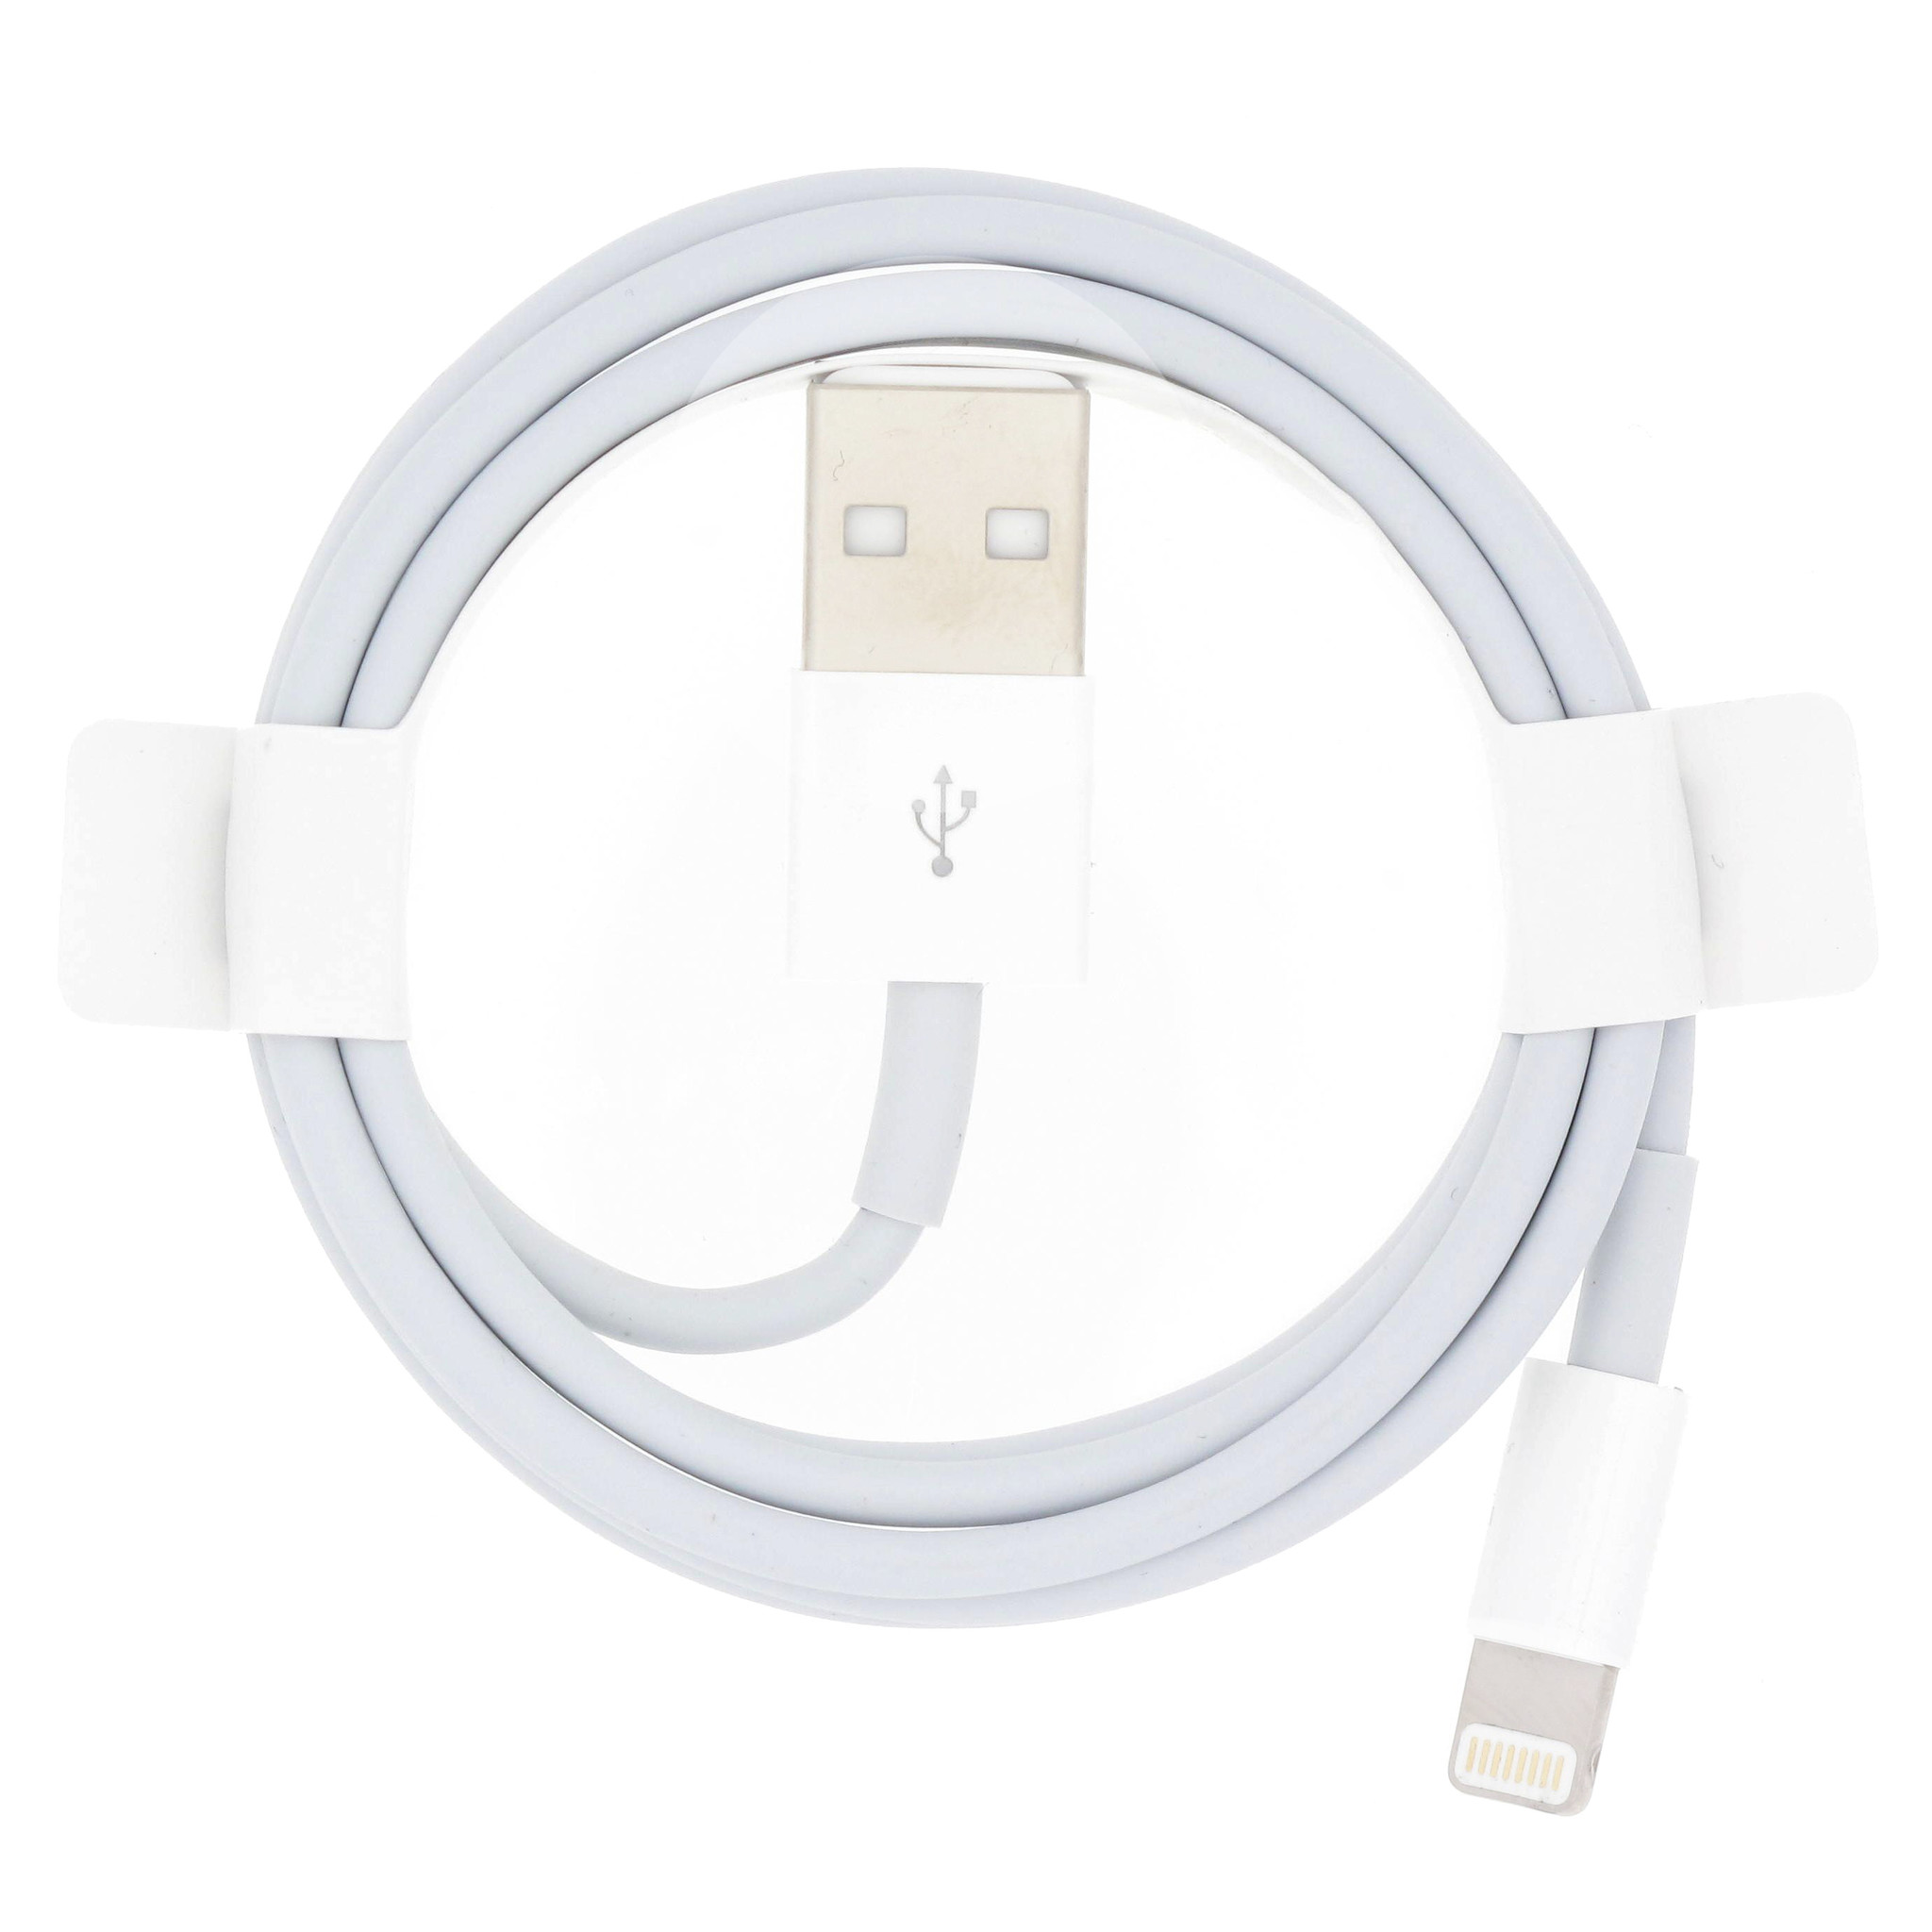 E75 Cable Original Apple Lightning USB Cable Apple Lightning Cable